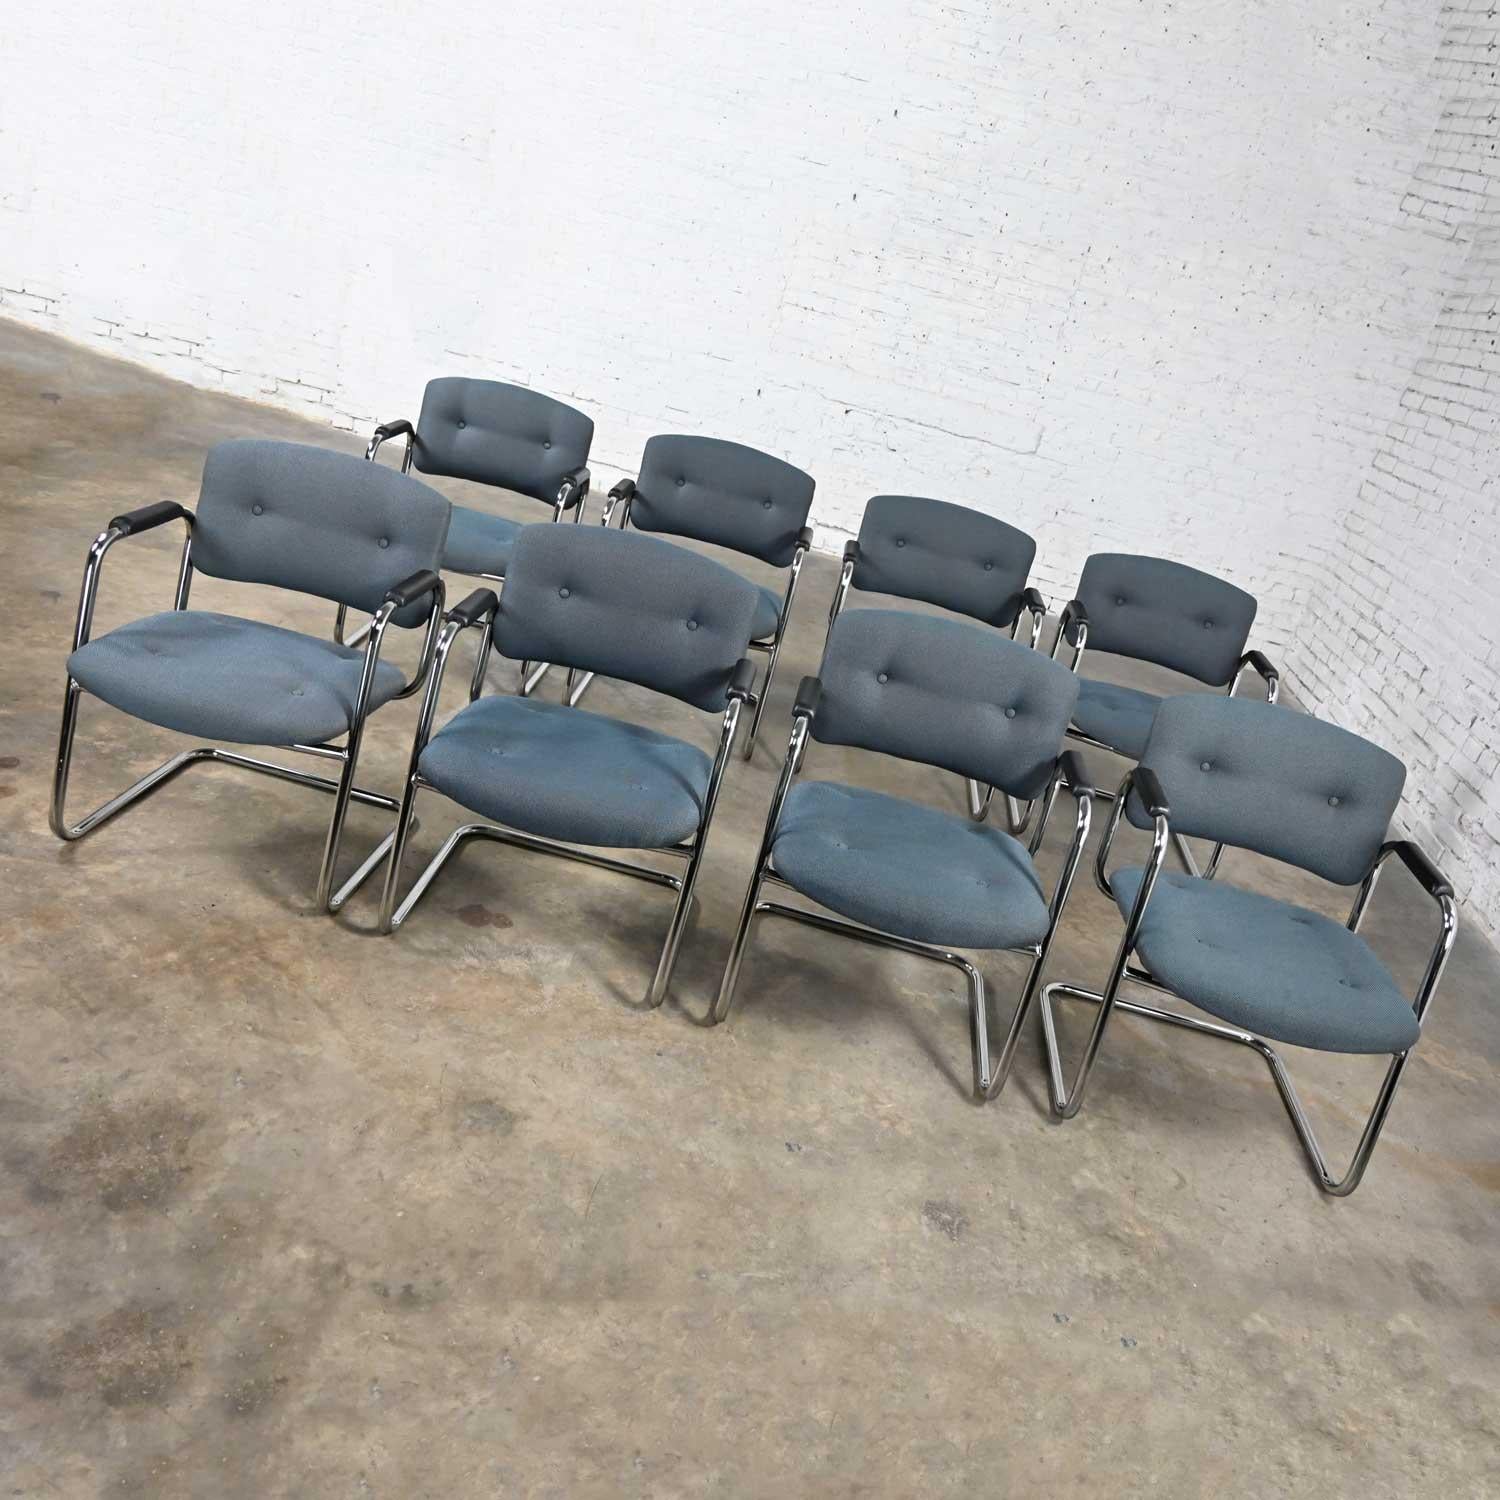 Fabric Vintage Chrome Cantilever Chairs United Chair Co Style Steelcase Sold Separately For Sale